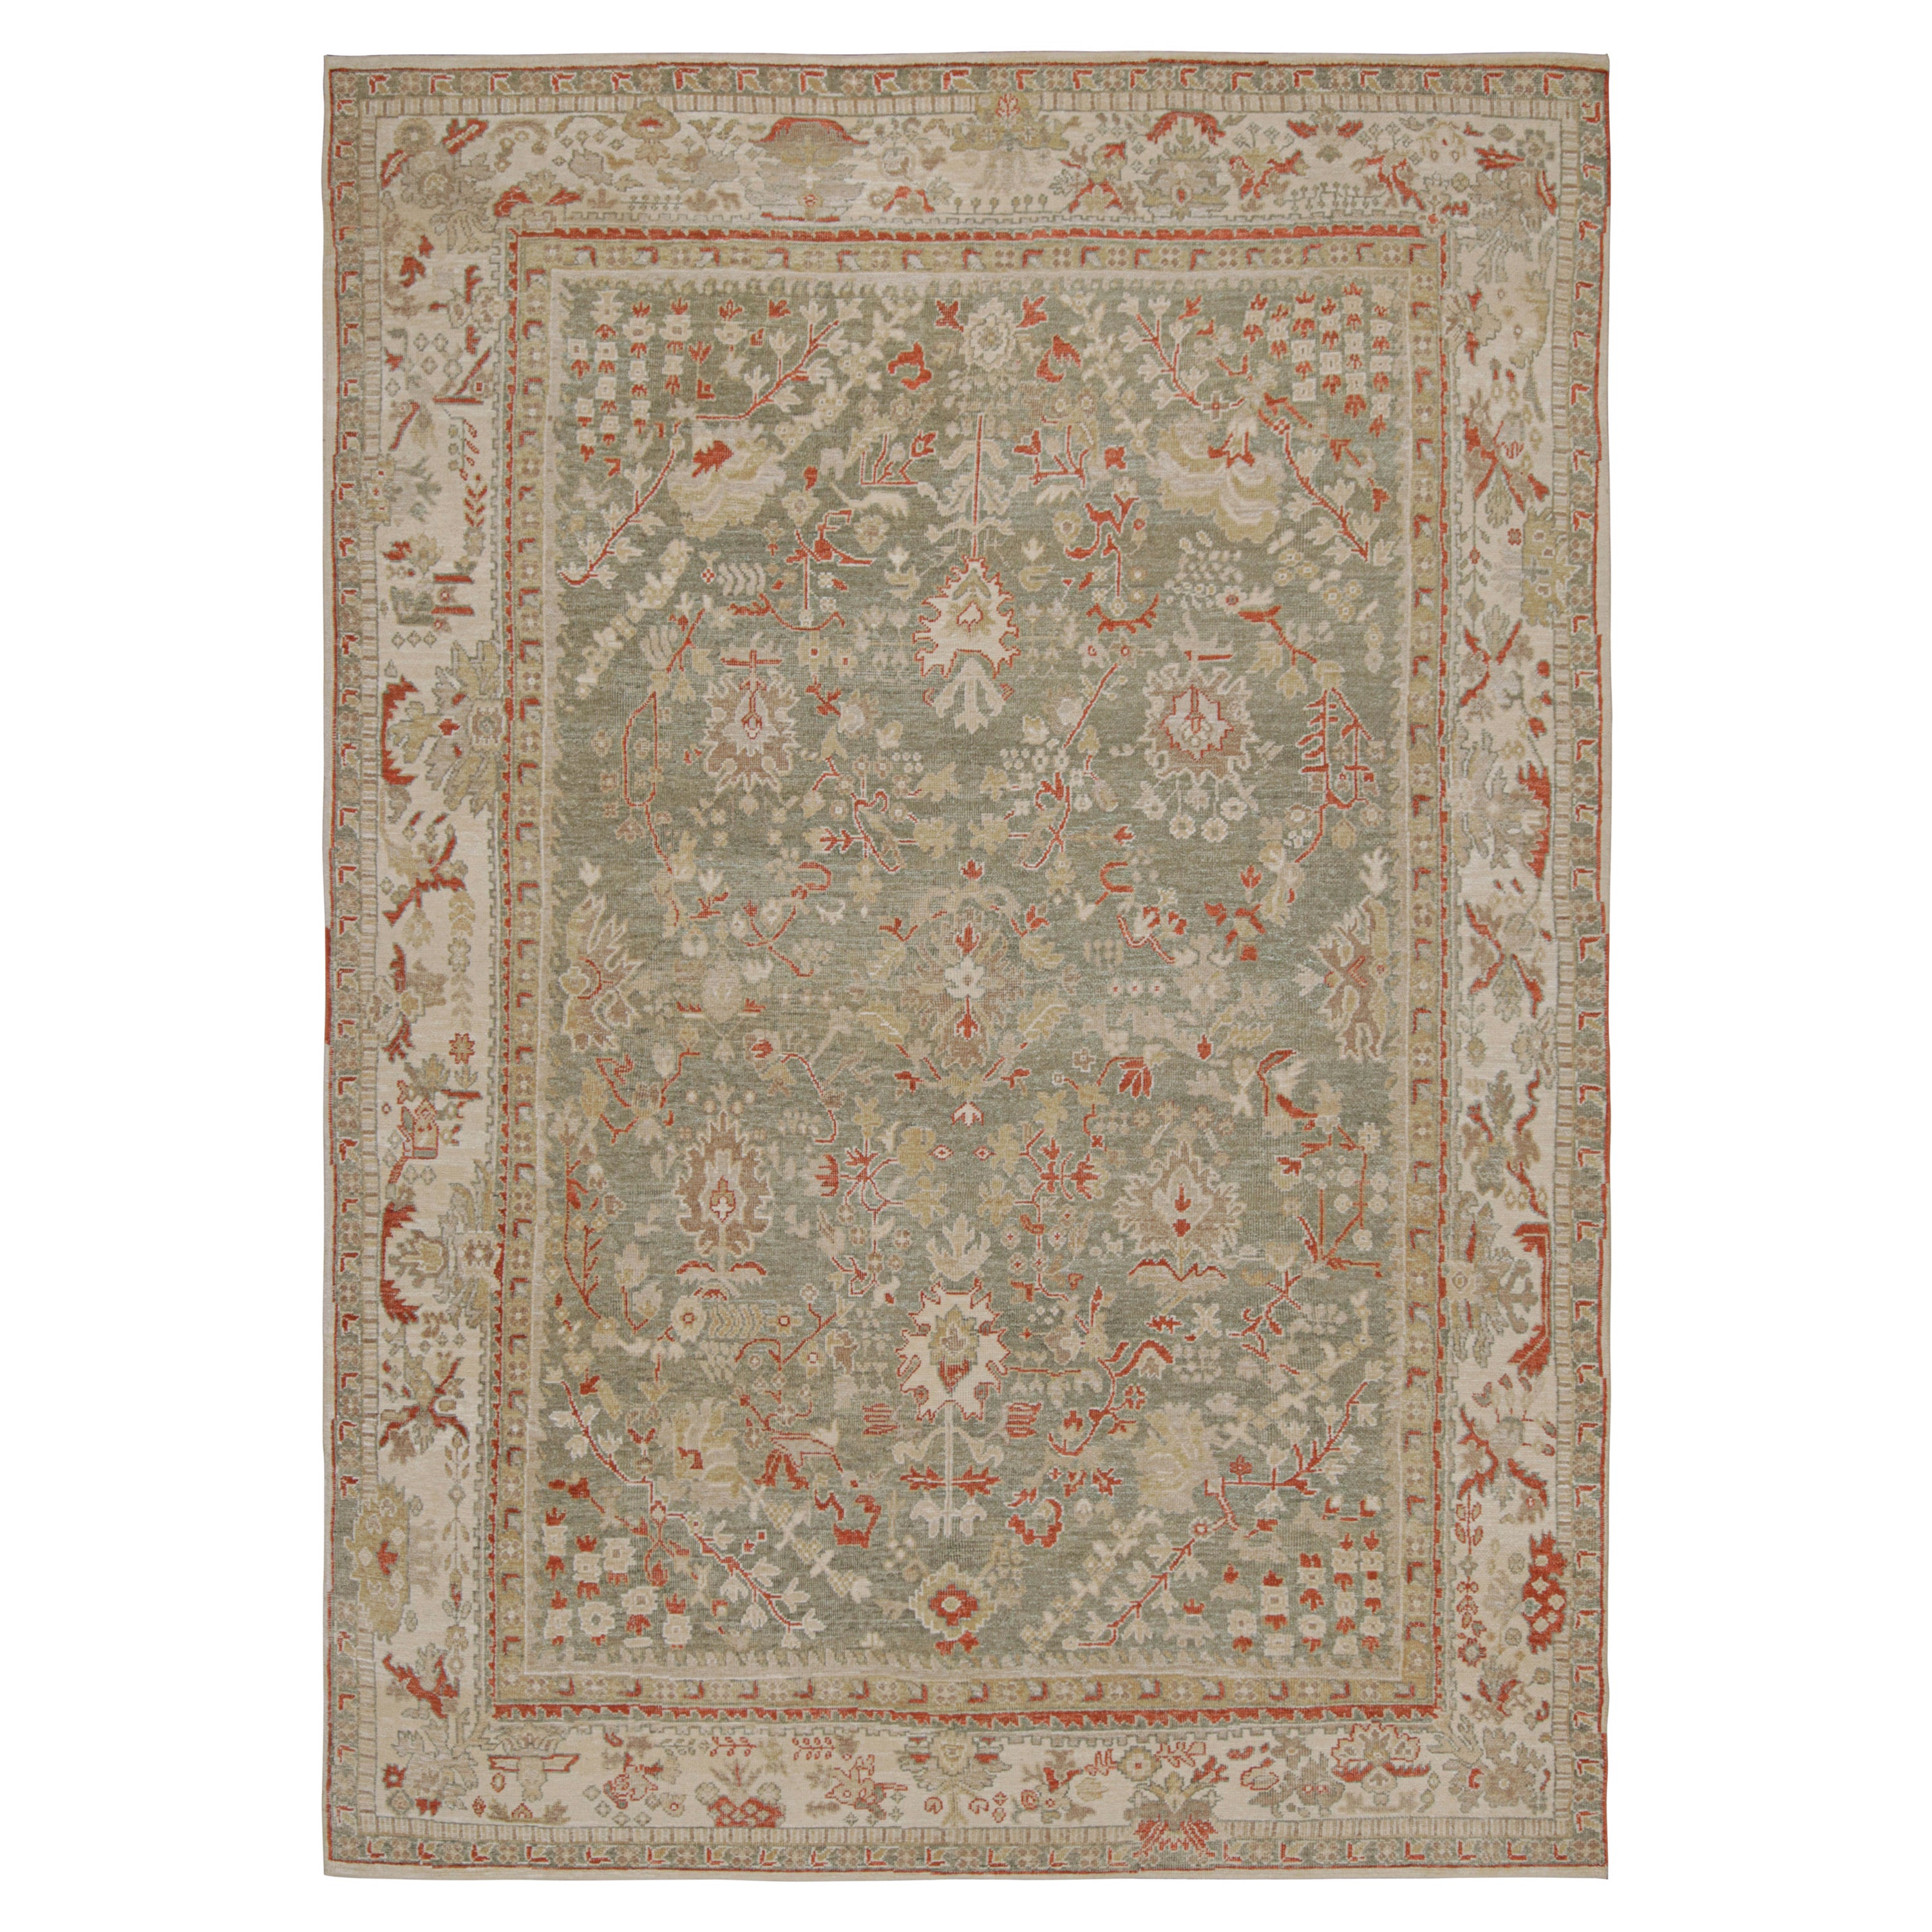 Rug & Kilim’s Oushak Style Rug in Beige-Brown, Green Floral Patterns For Sale